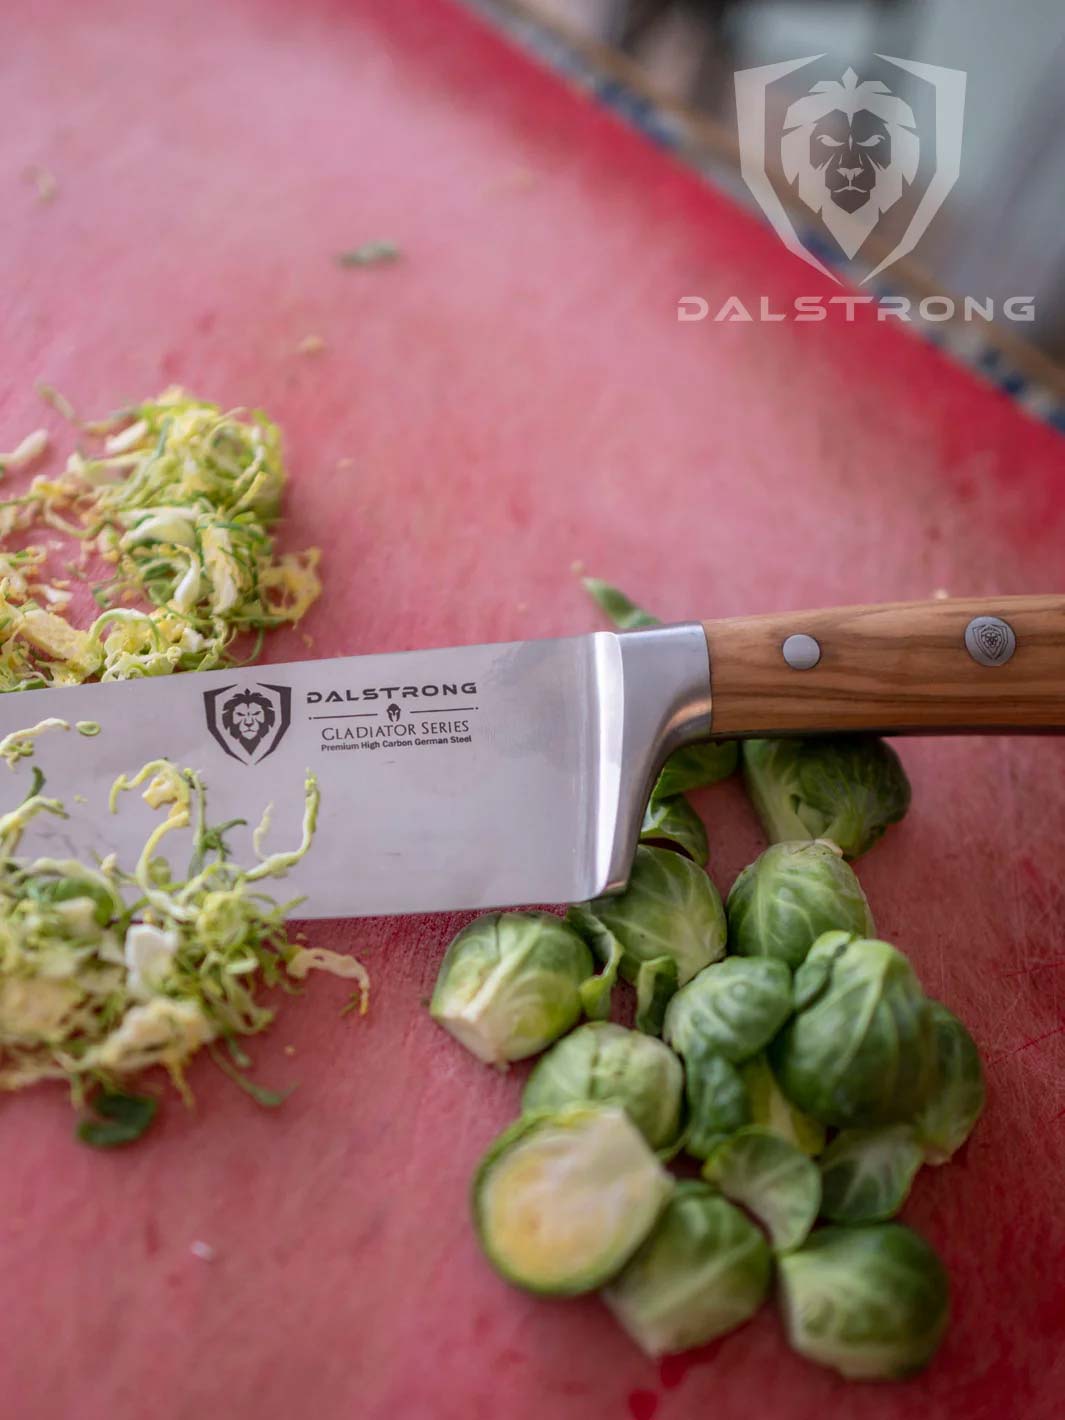 Dalstrong gladiator series 8 inch chef knife with olive wood handle and chopped brussel sprouts.